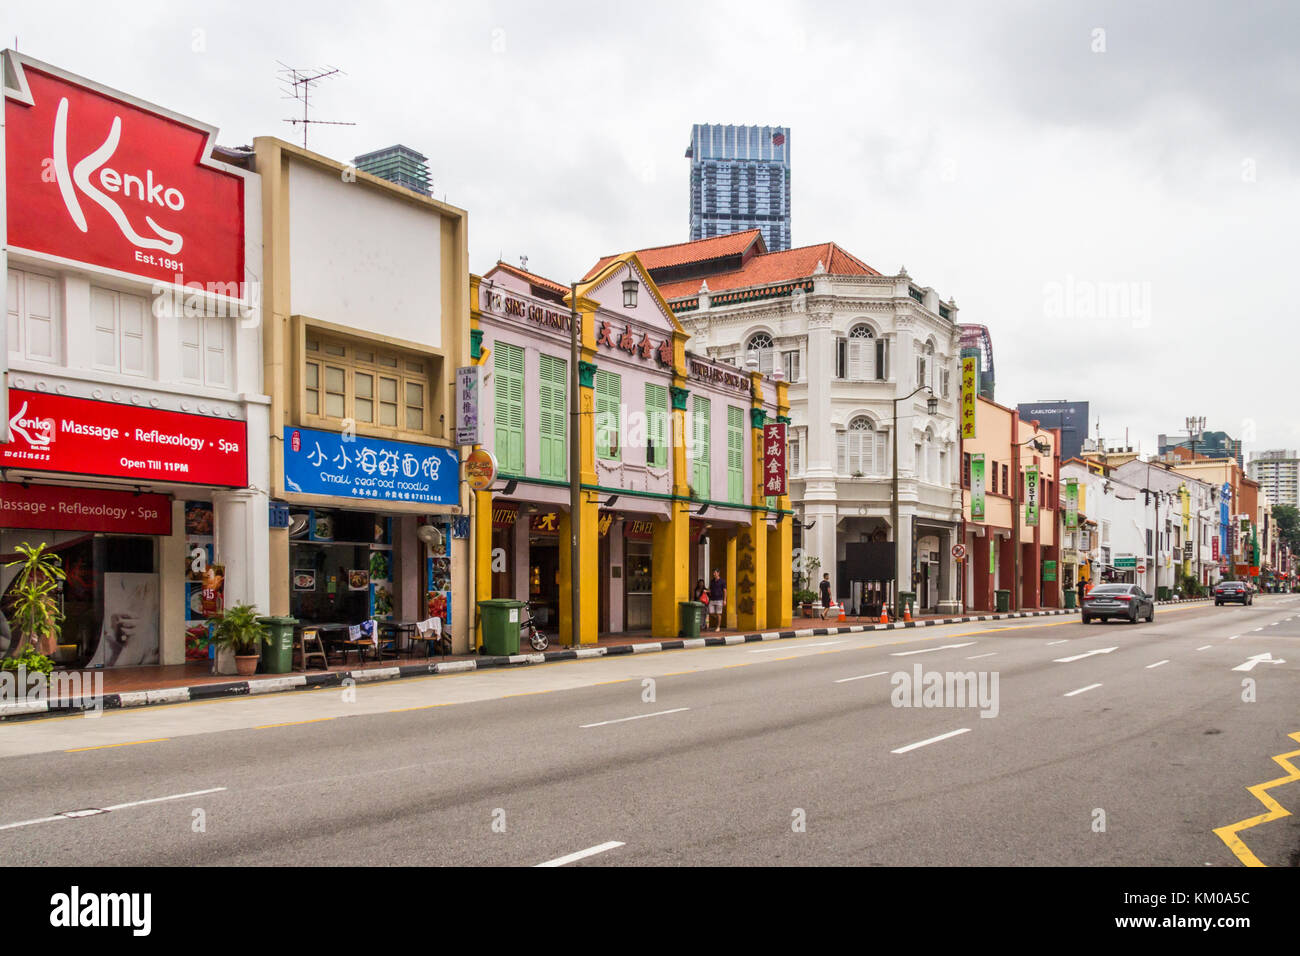 Typical Chinese shophouses, South Bridge Road, Chinatown, Singapore Stock Photo